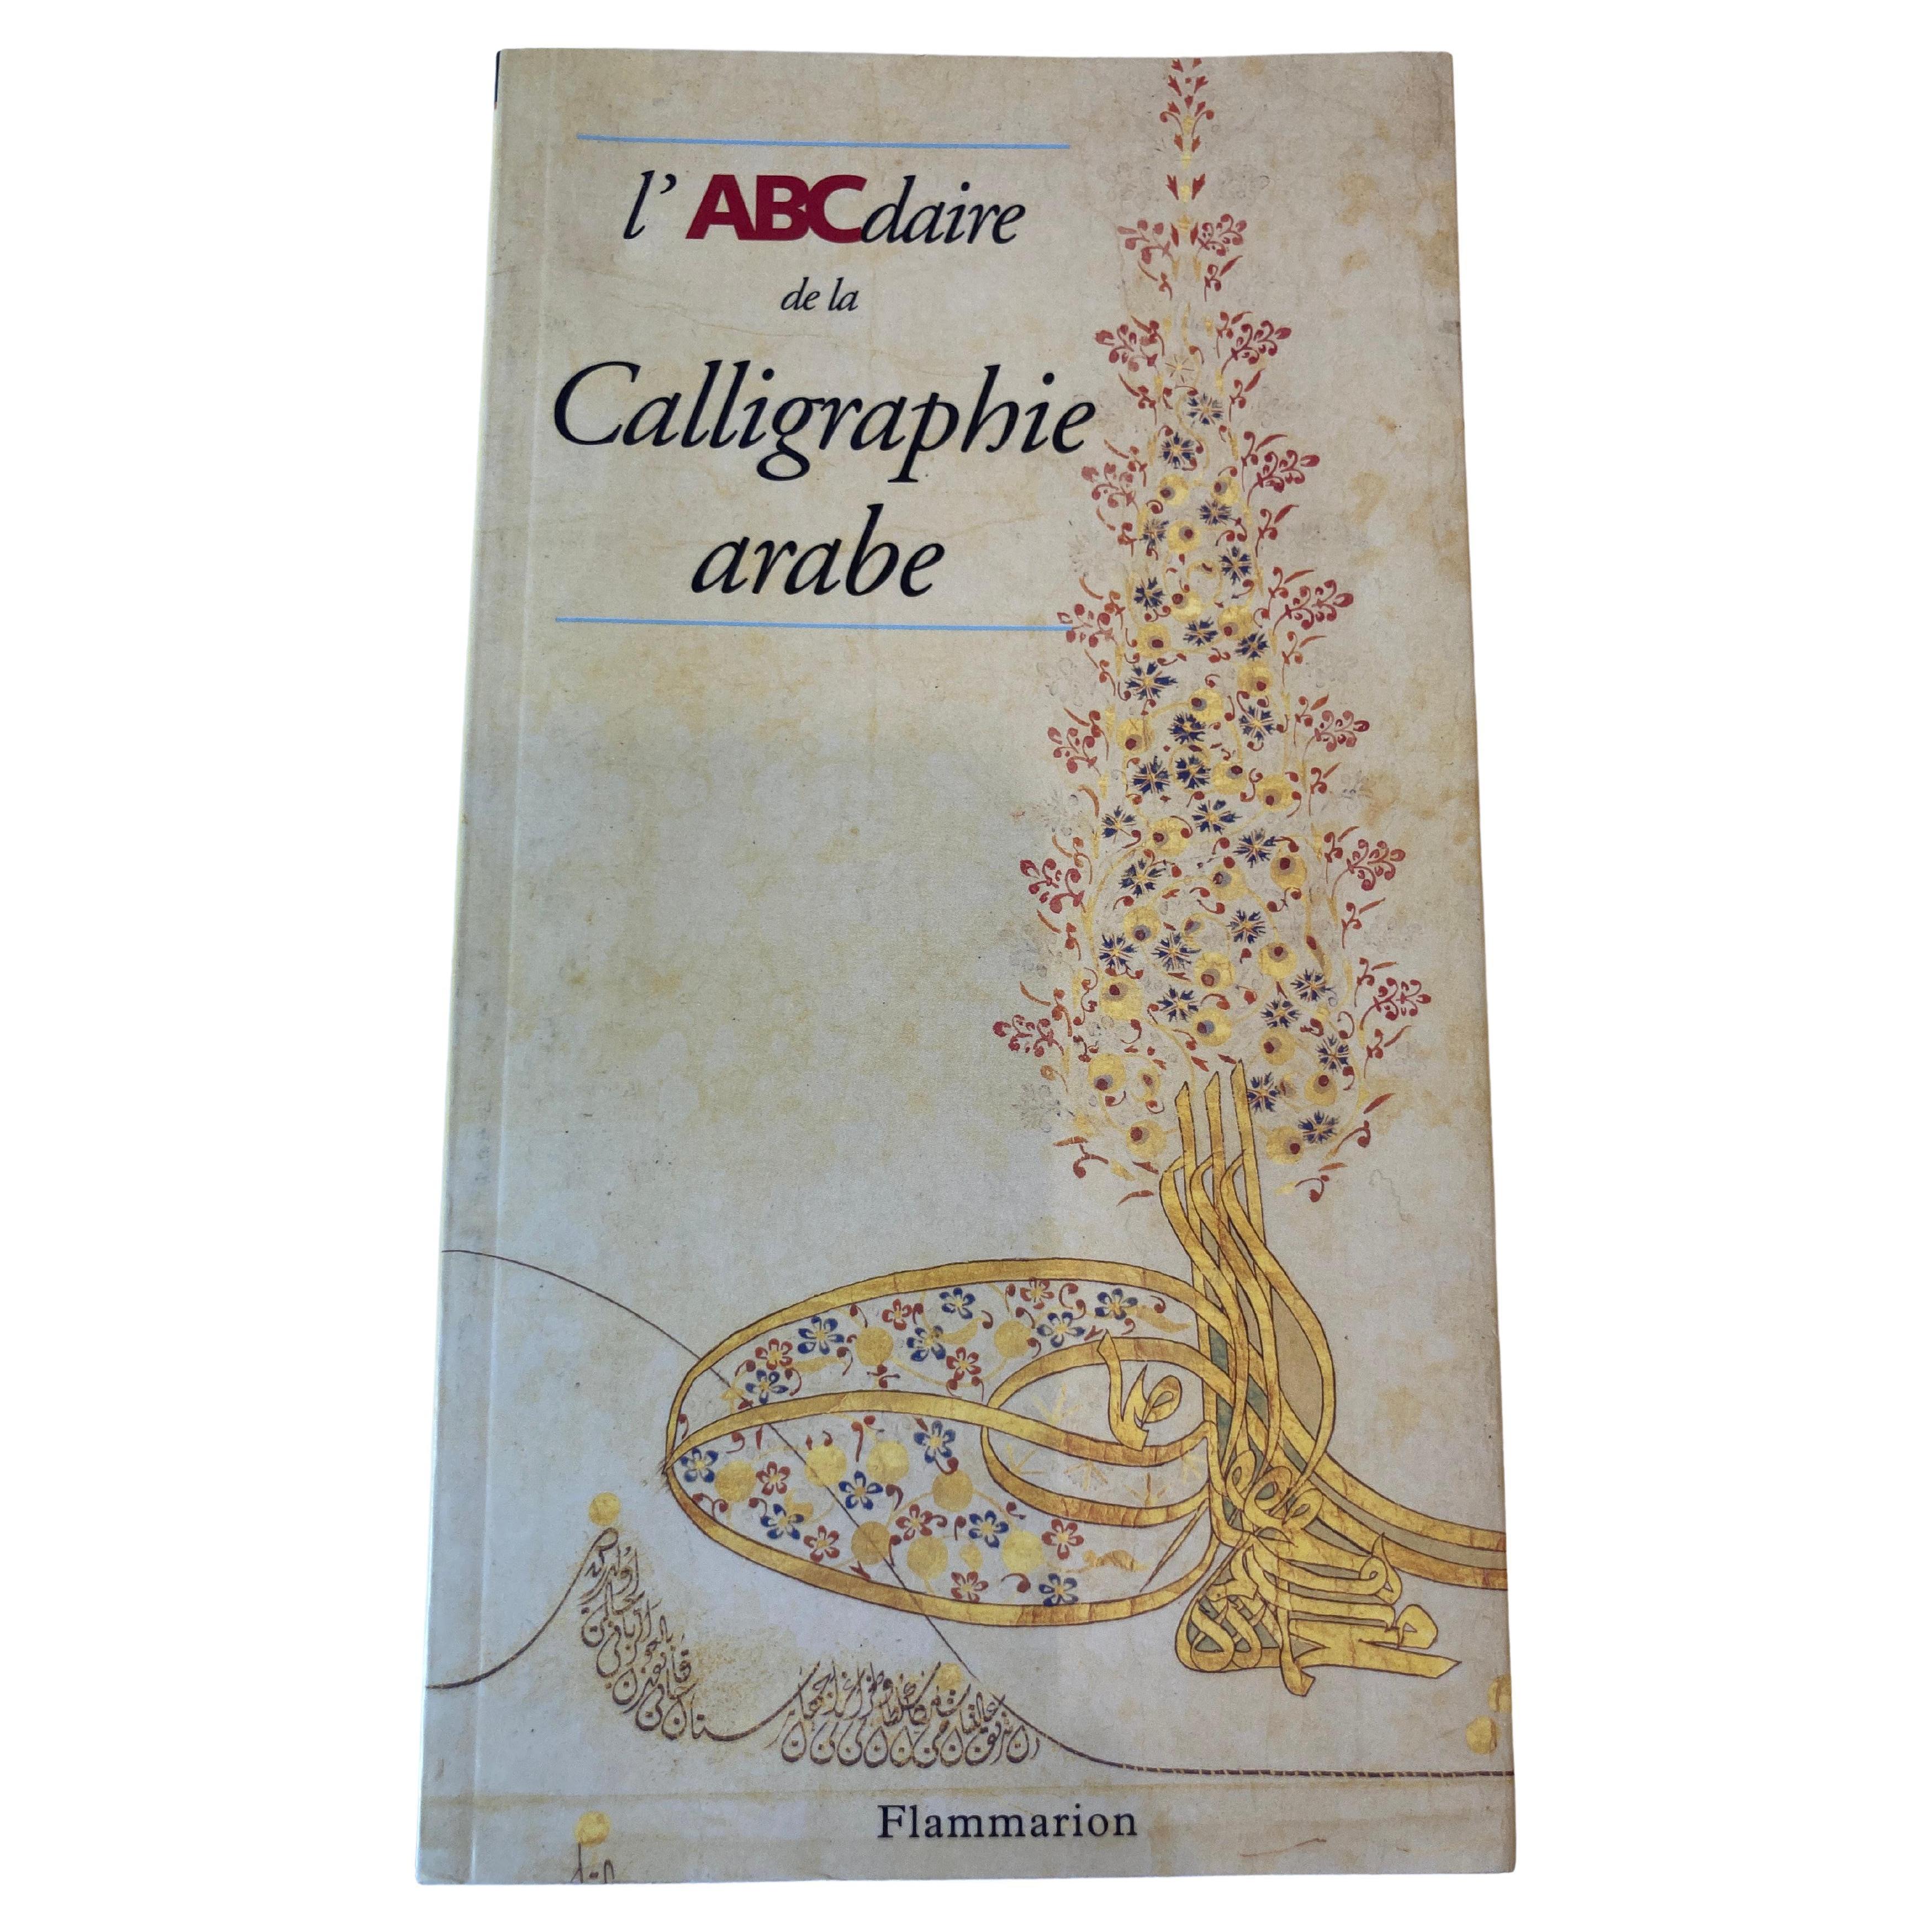 L'ABCdaire de la calligraphie arabe (ABCDAIRES) (French Edition) Paperback Book